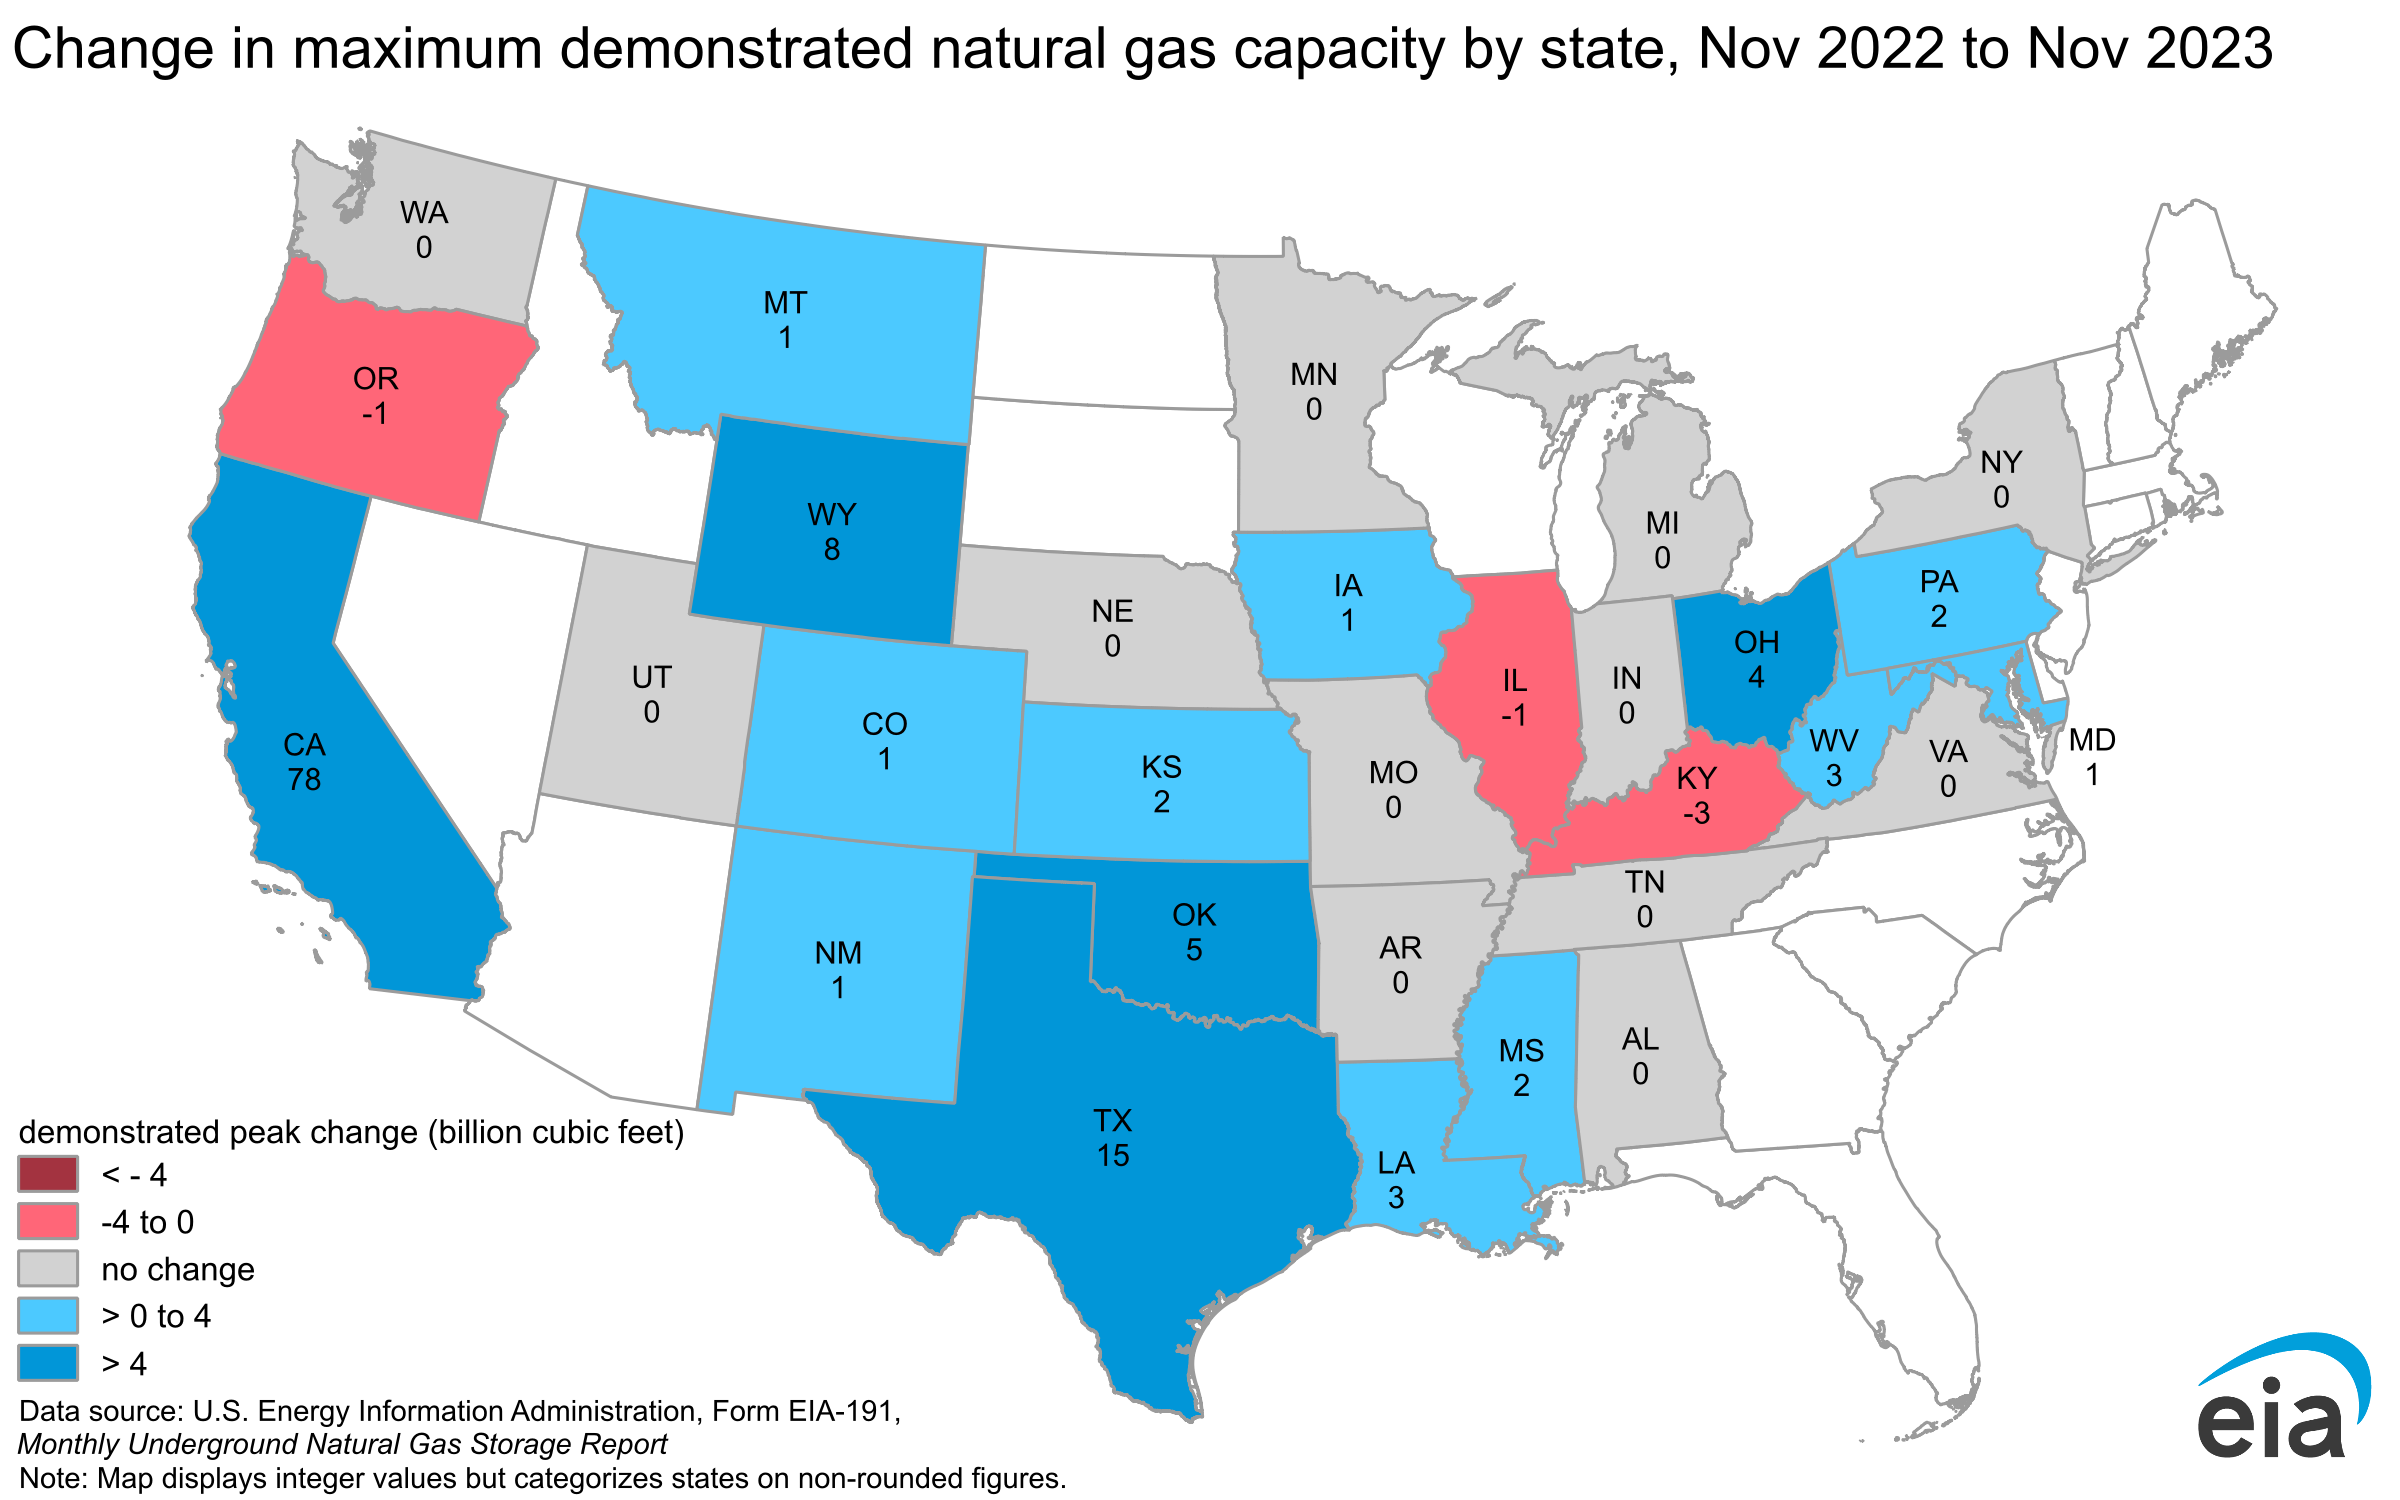 Change in maximum demonstrated natural gas capacity by state, Nov 2020 to Nov 2021